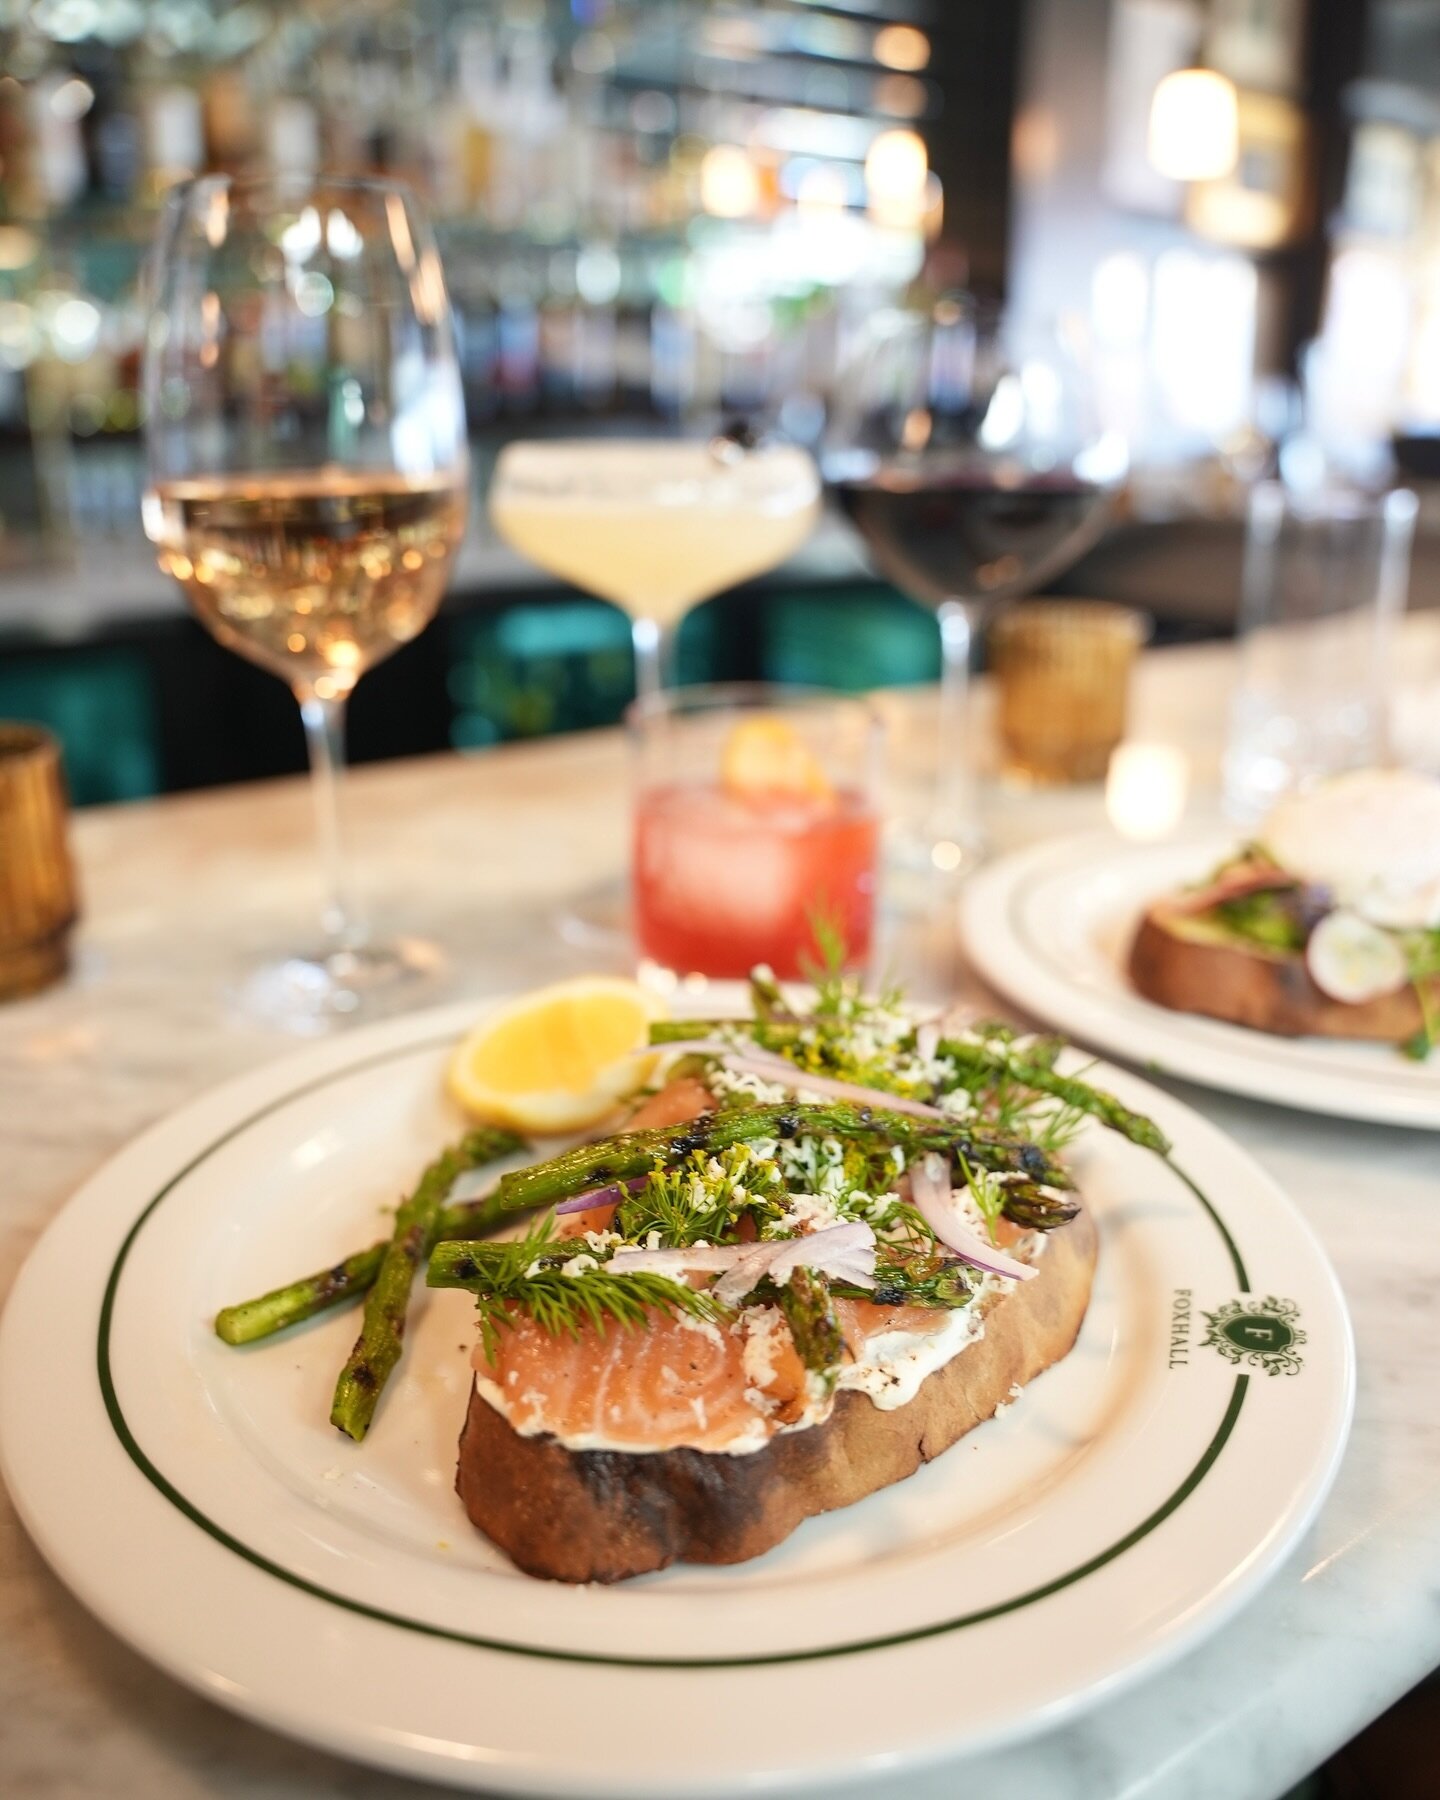 Grilled asparagus and salmon on a thick slice of toast, with a dash of herbs &ndash; exactly what you need for a lunchtime treat. Grab a glass of white and you&rsquo;re all set! 

#losangeles #beverlyhills #LunchGoals #EatWell #deliciousfood